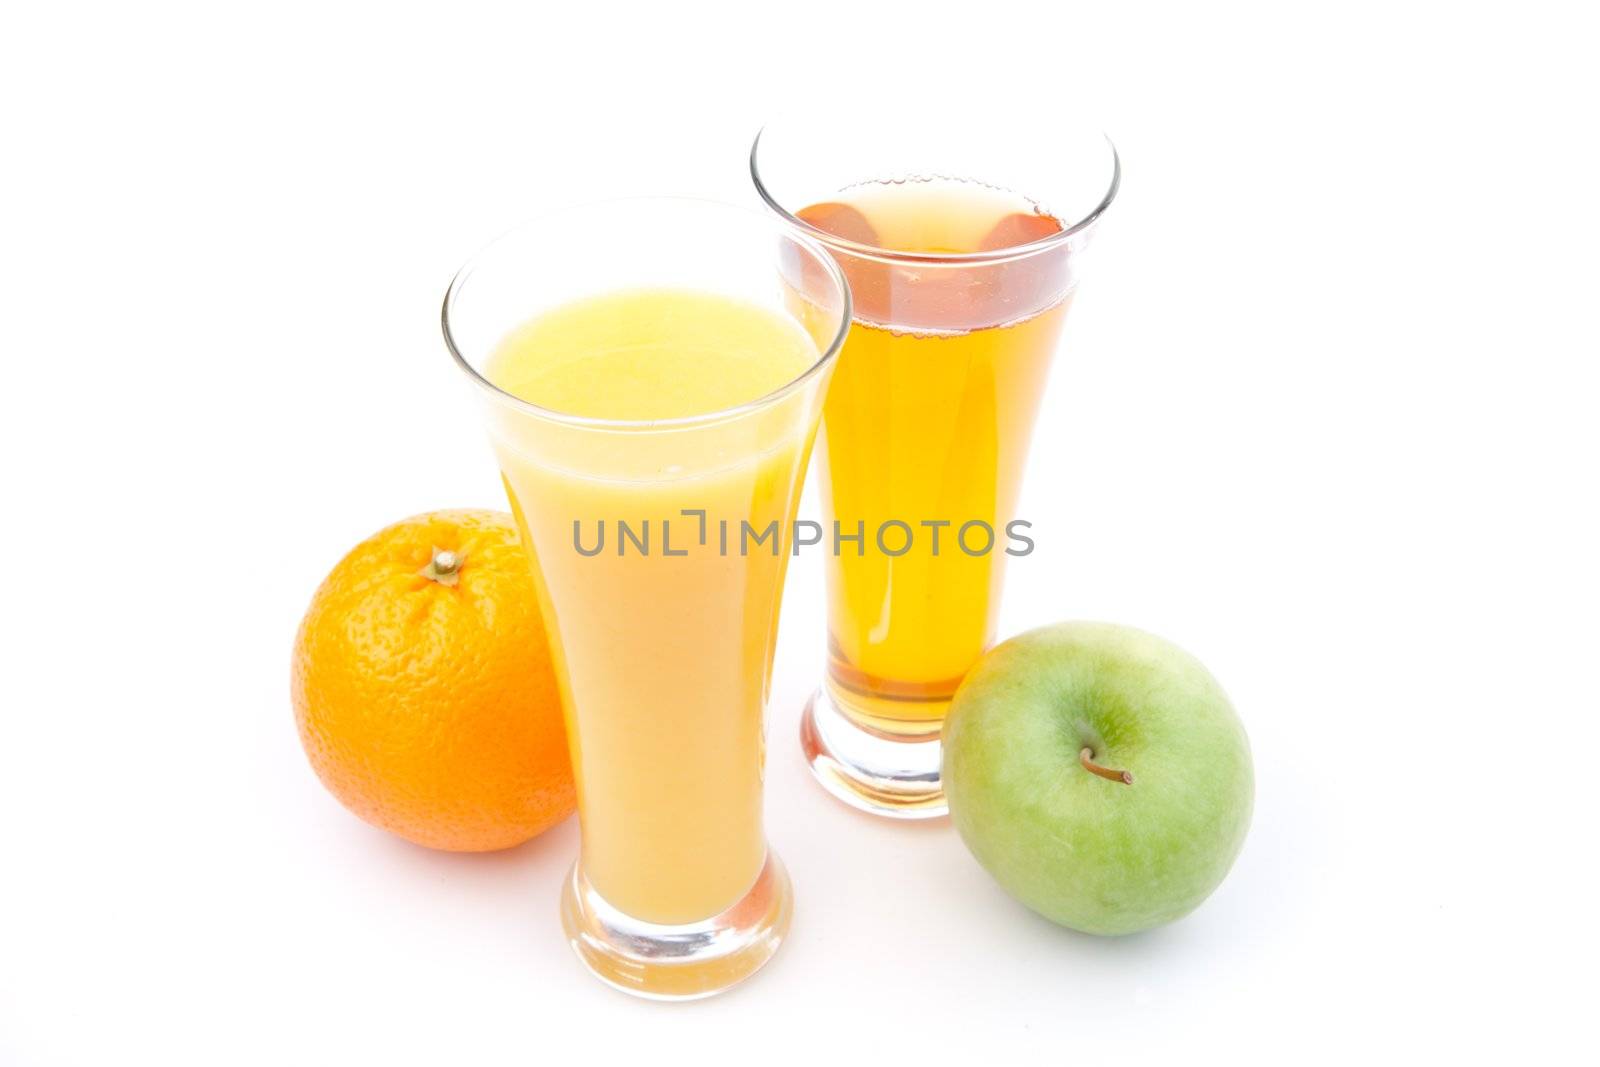 Glass of apple juice near a glass of orange juice against white background